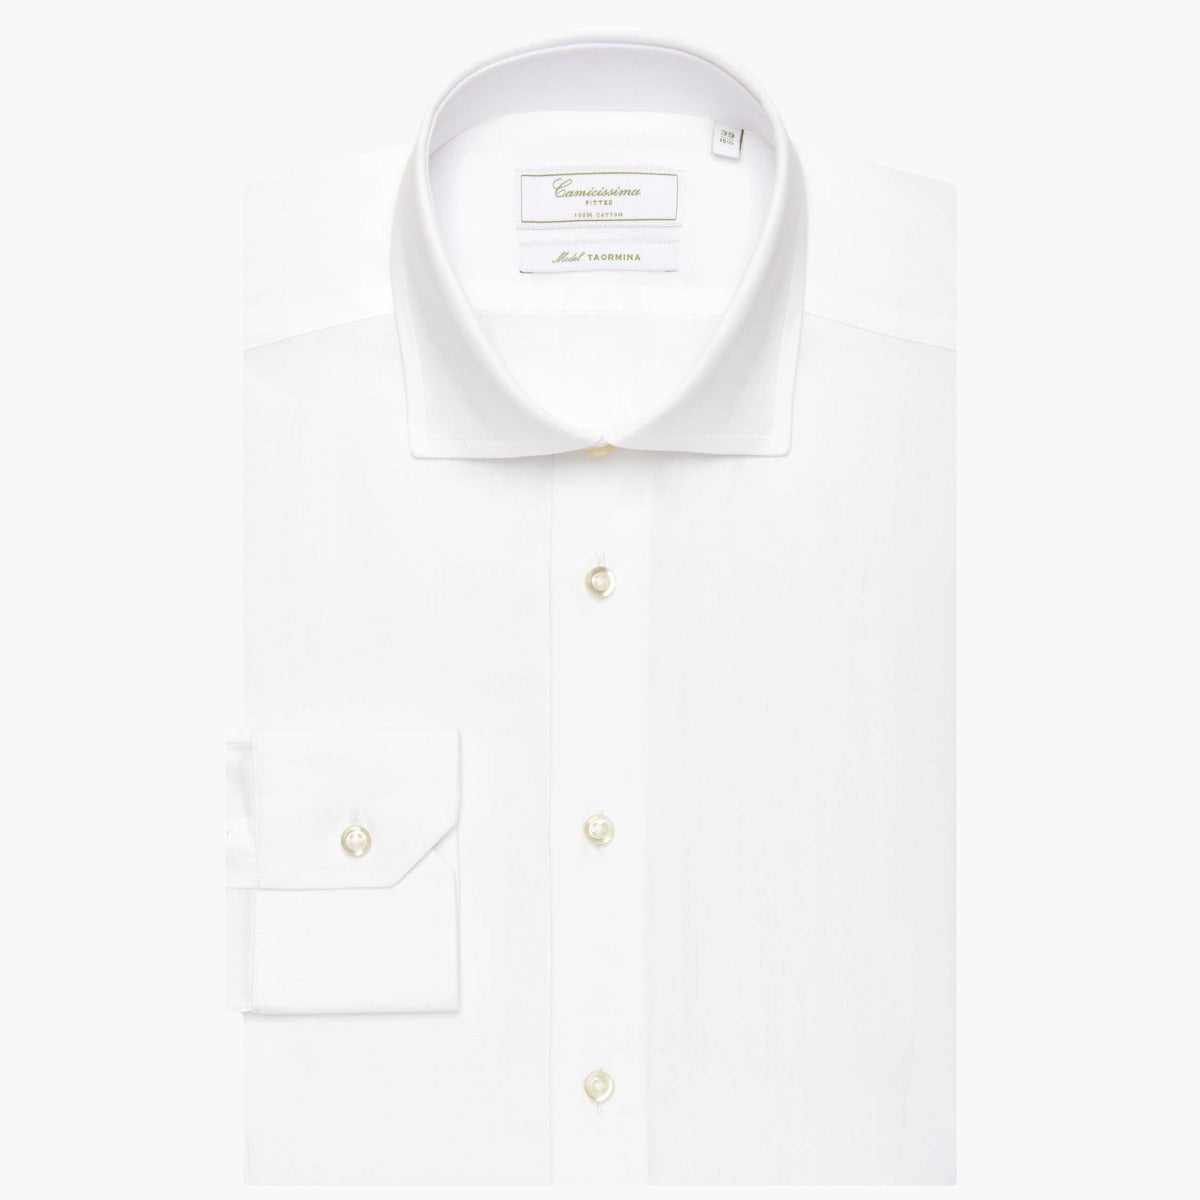 Camicissima Taormina Permanent White Fitted Shirt Taormina Francese | LEVISONS